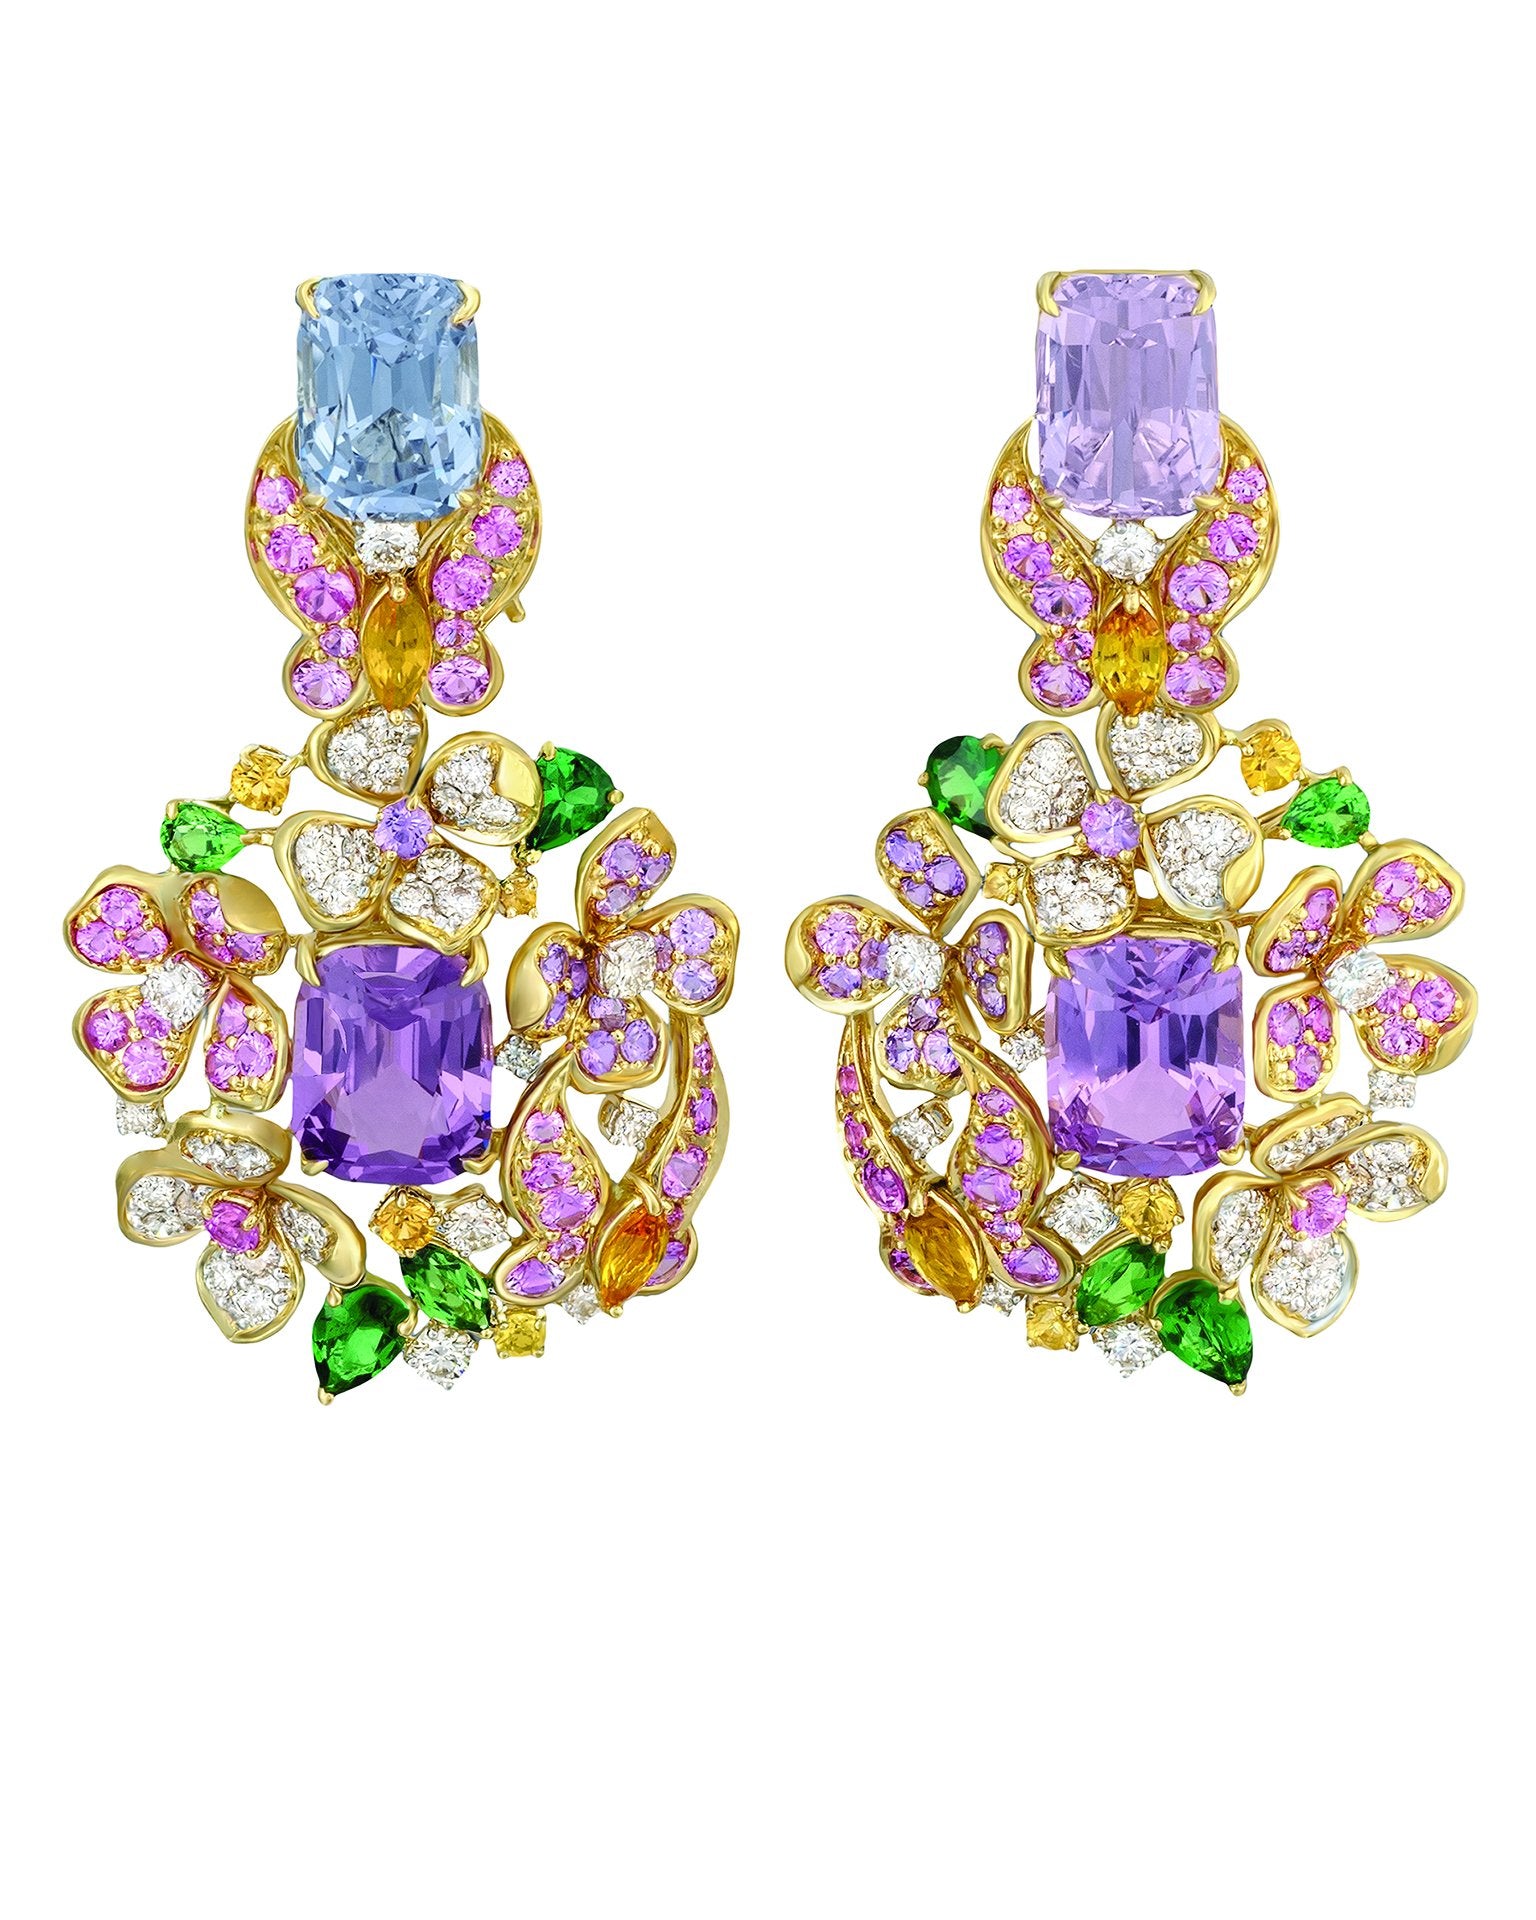 "Papillon" pink, purple, and violet spinels surrounded by butterflies and flowers with a myriad of sapphires, tsavorite garnets and diamonds, crafted in 18 karat yellow gold.